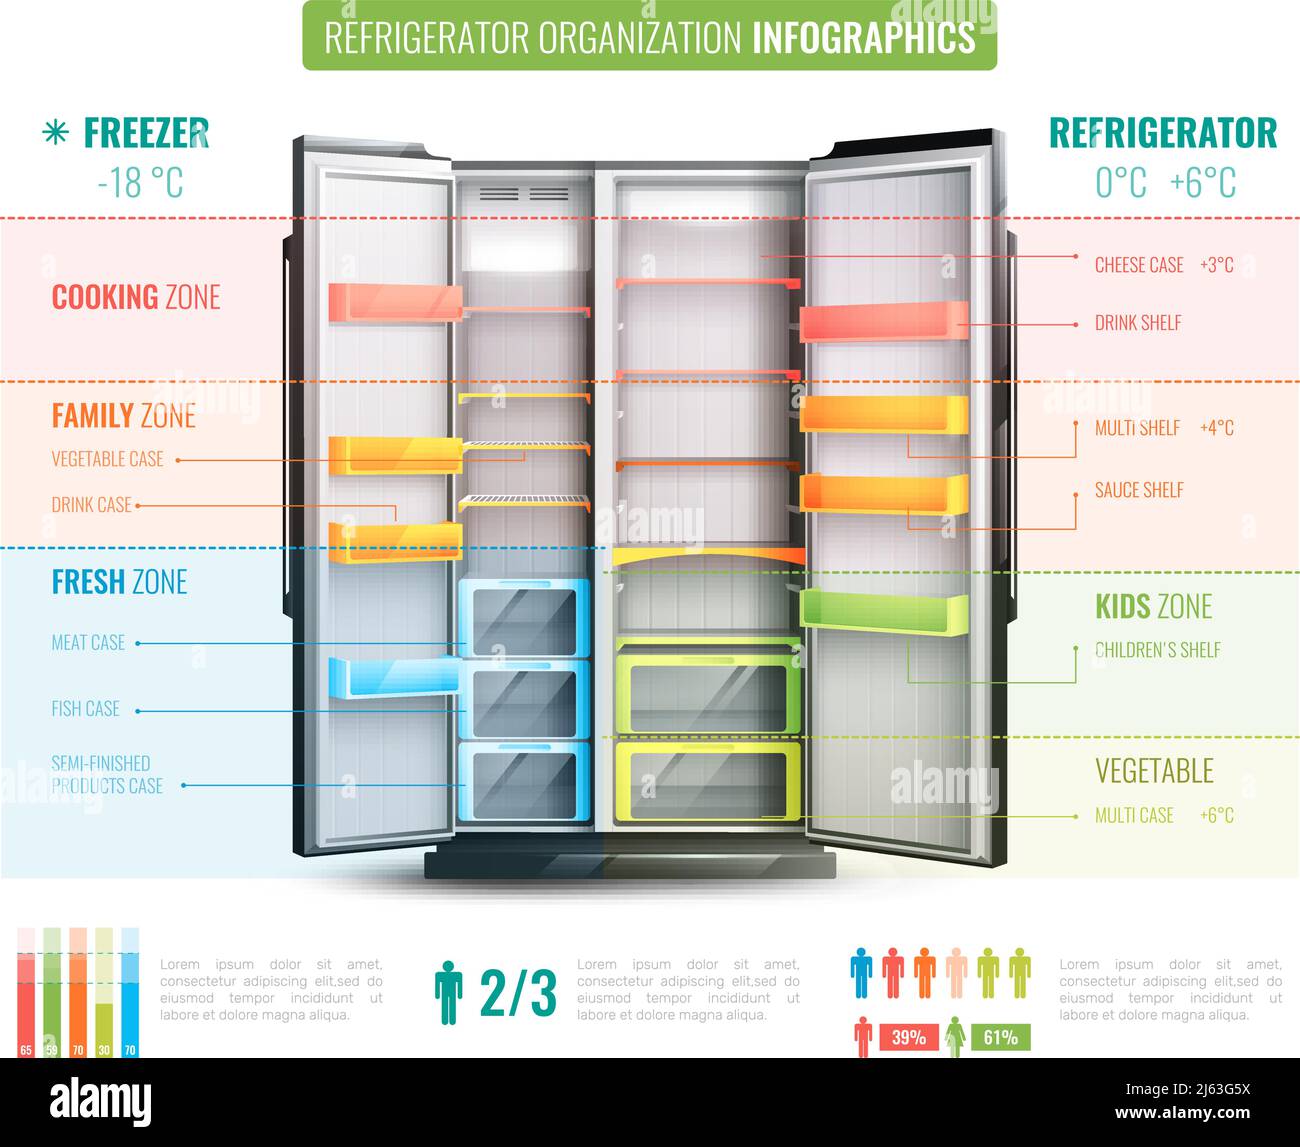 Refrigerator organization infographics with information about various zones in freezer and in cooling chamber vector illustration Stock Vector